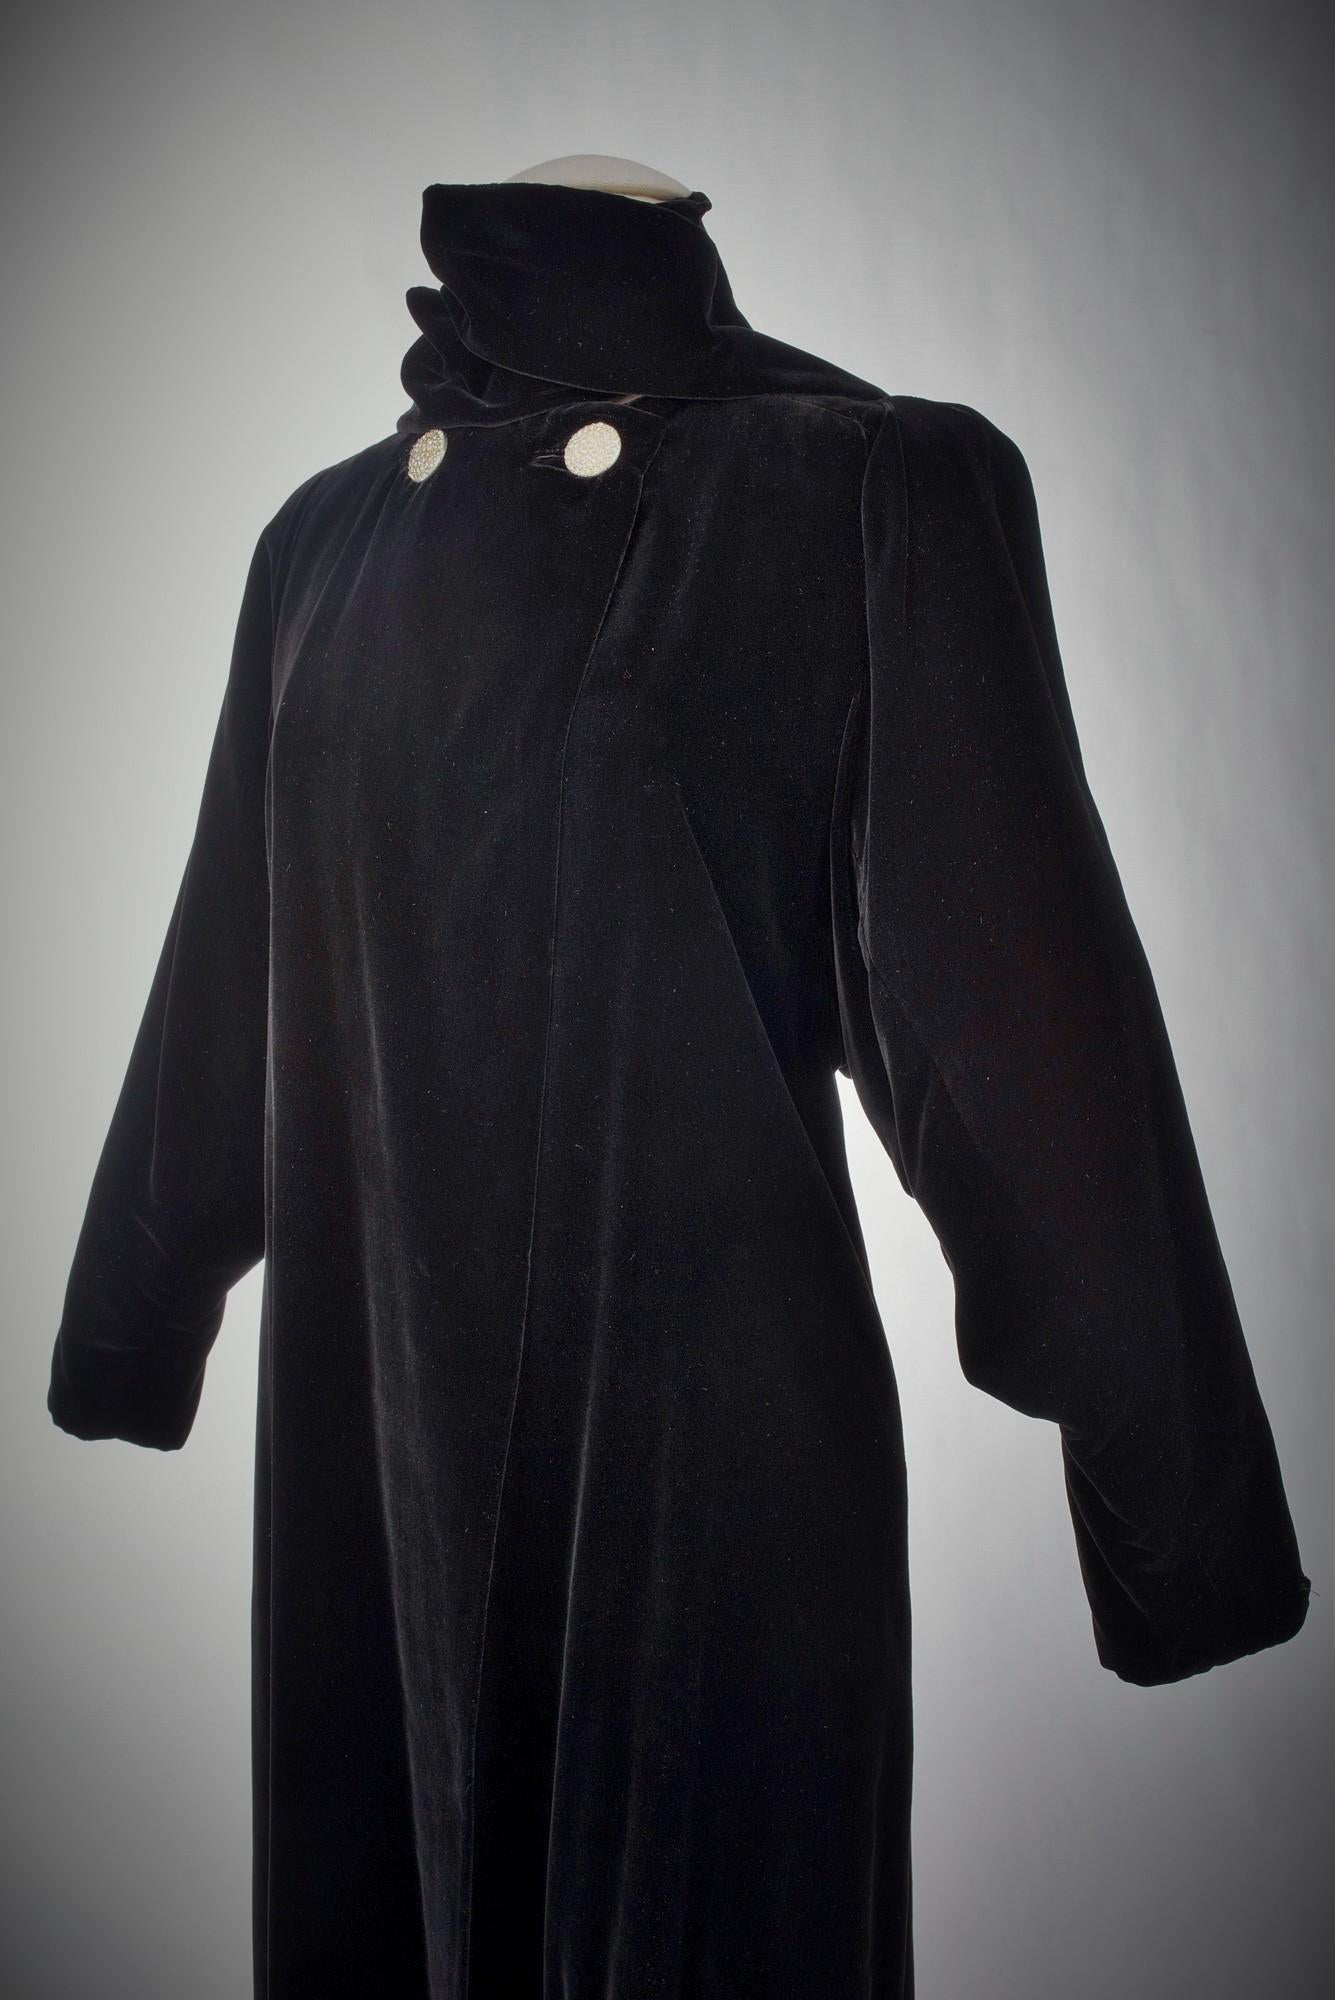 Circa 1937

France for Export United States or England

Long evening coat in black silk velvet, scarf to tie on the collar closed by two large rhinestone buttons, duchesse satin lining, Labelled Reproduction Lucien Lelong, Paris. This is a license